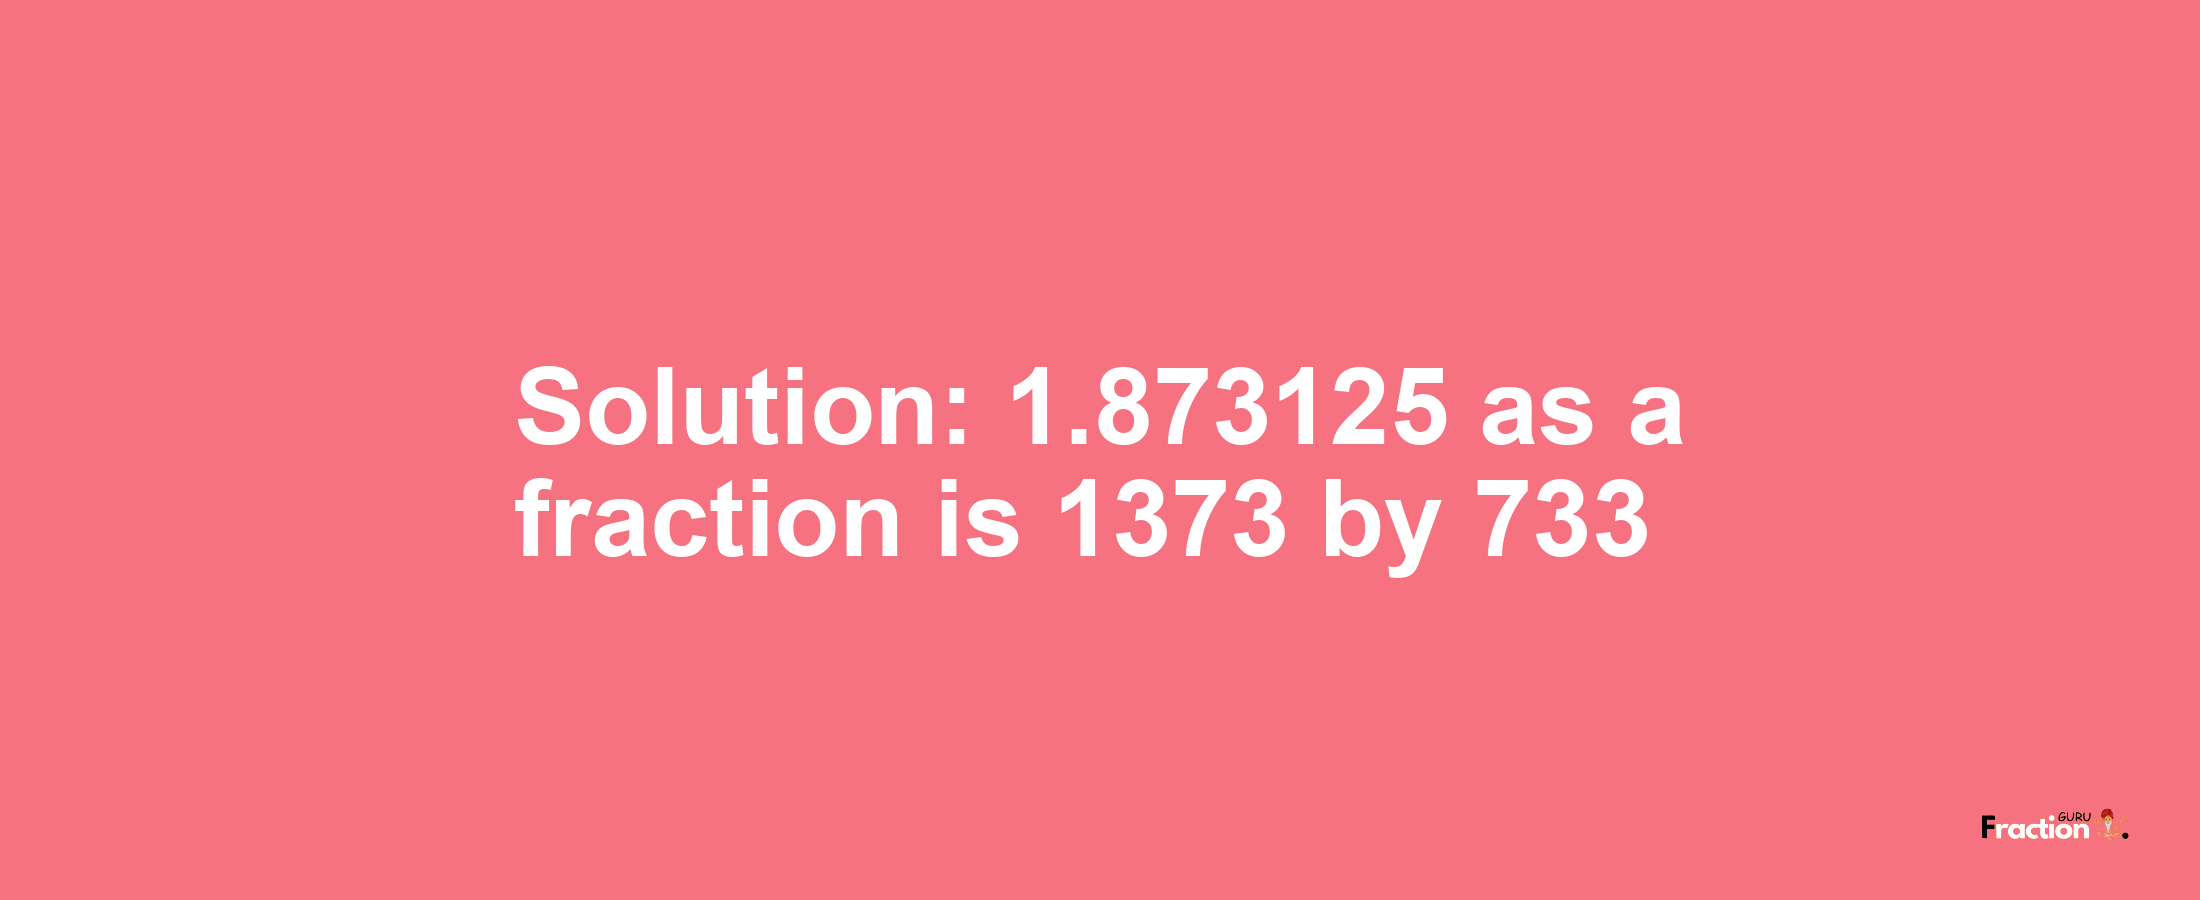 Solution:1.873125 as a fraction is 1373/733